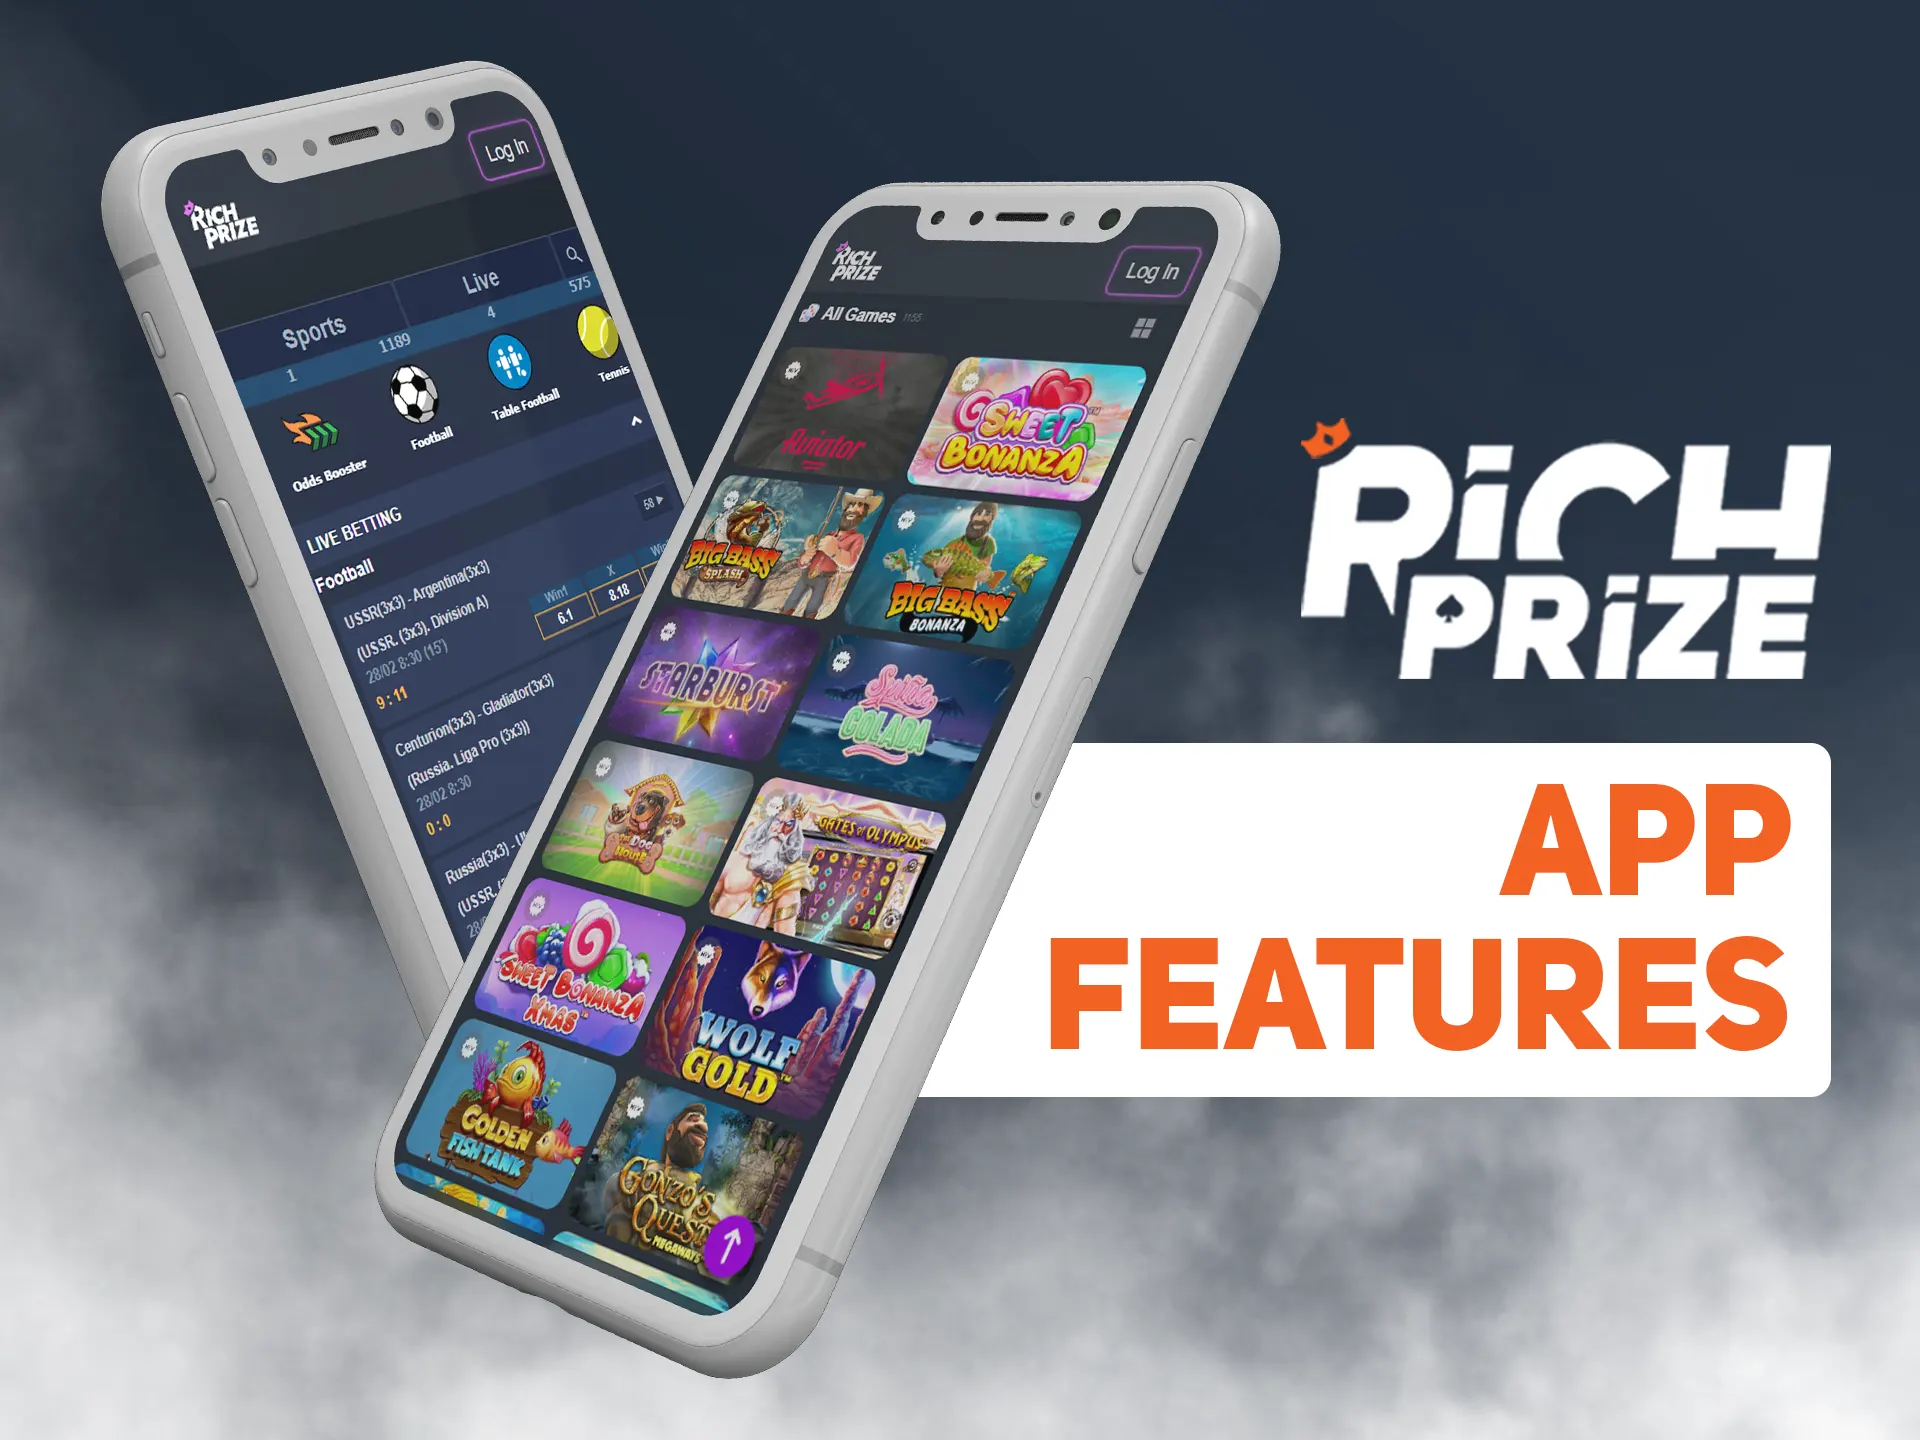 Learn more about Richprize app features.